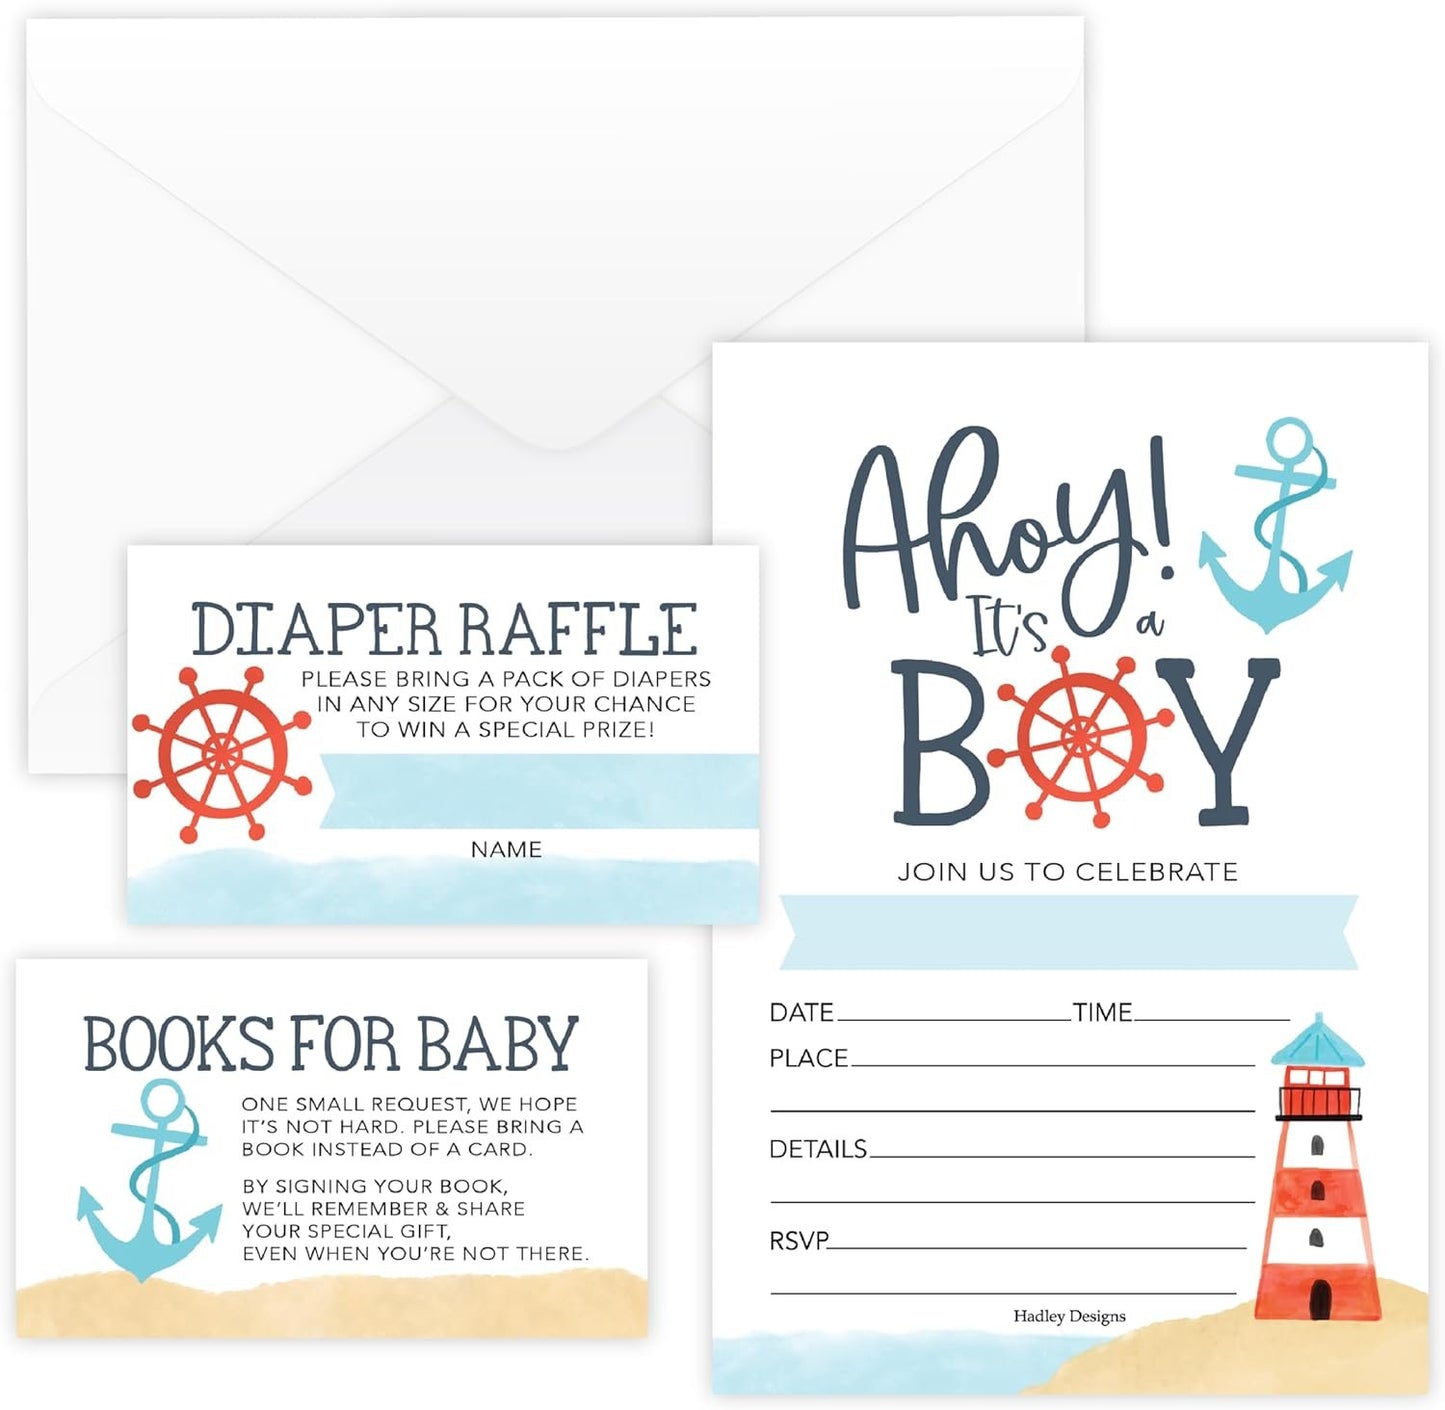 15 Nautical Baby Shower Invitations For Boy Baby Shower Ideas - Boy Baby Shower Invites For Boy, Boy Baby Shower Invitations Boy With Diaper Raffle, Baby Boy Shower Invitations, Baby Invitations